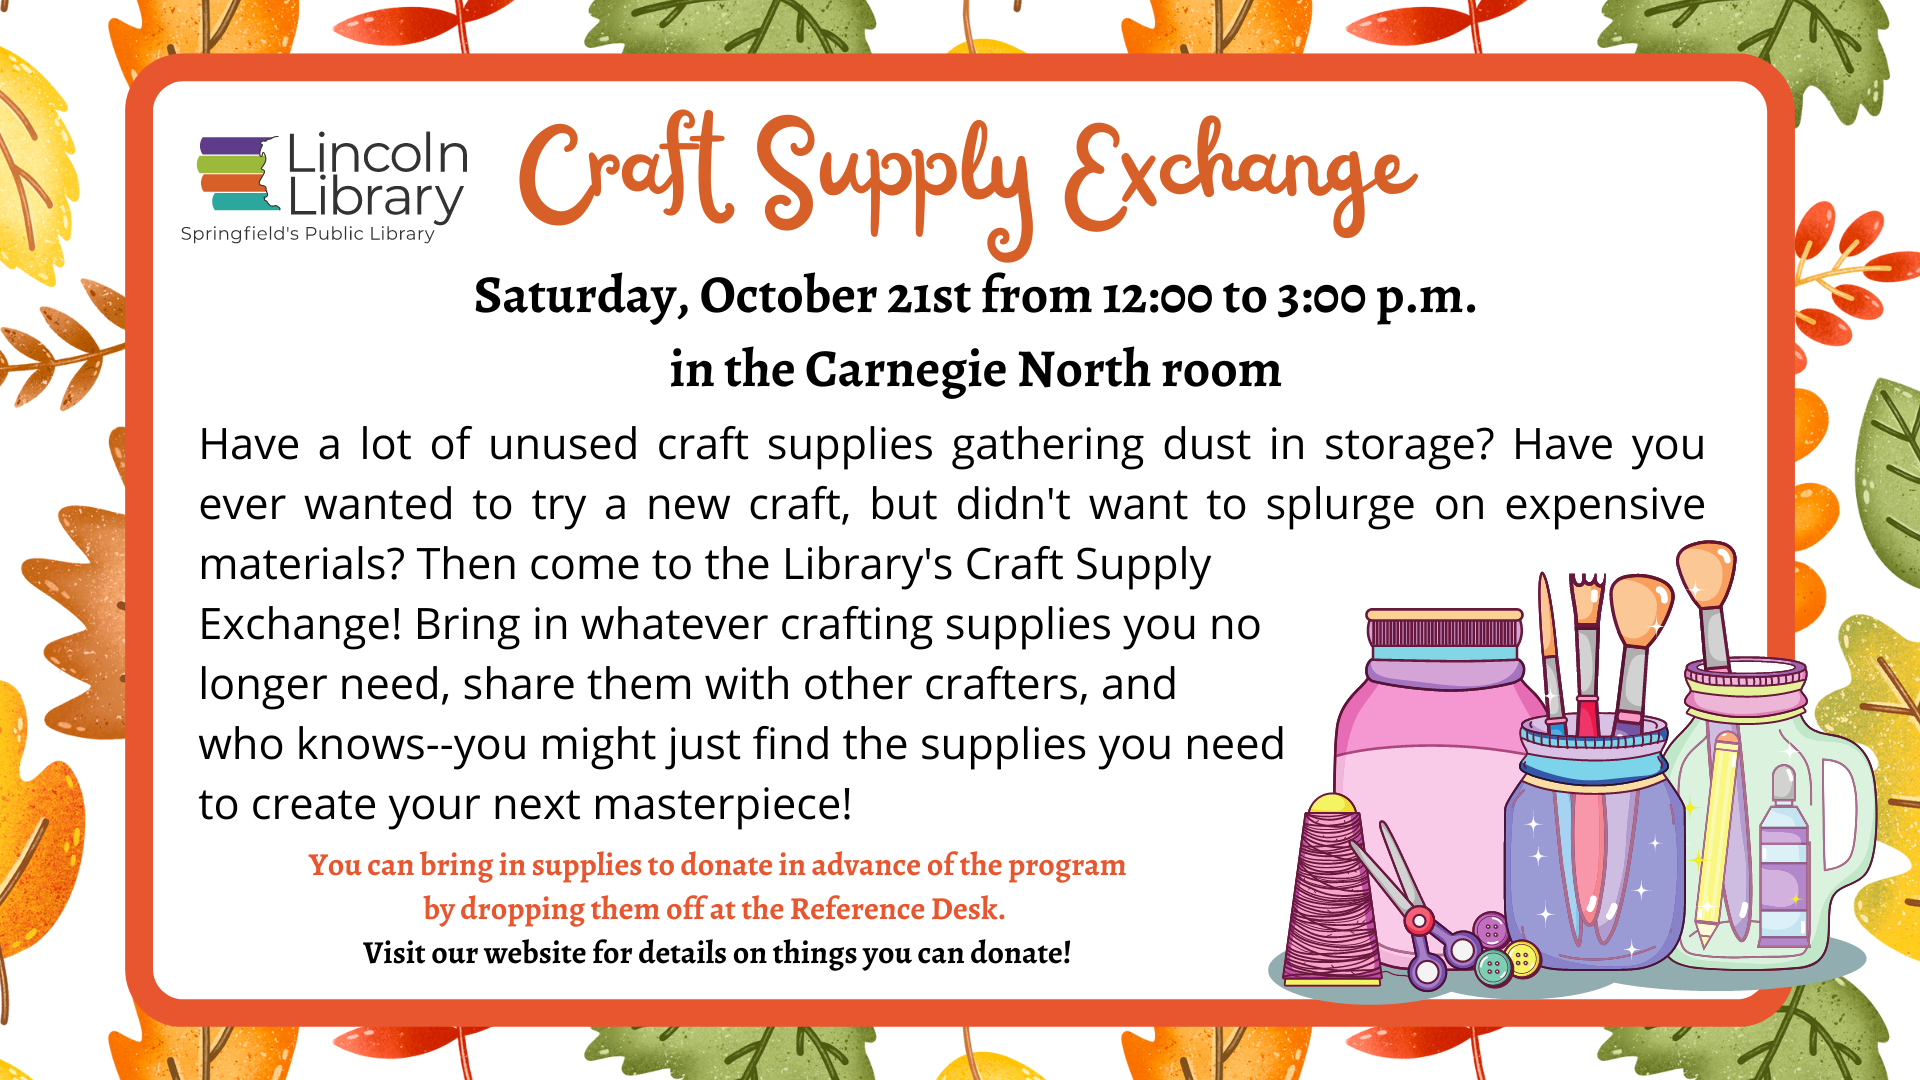 Promotional image for Lincoln Library Fall Craft Supply Exchange, to be held on Saturday, October 21st from 12:00 to 3:00 p.m.